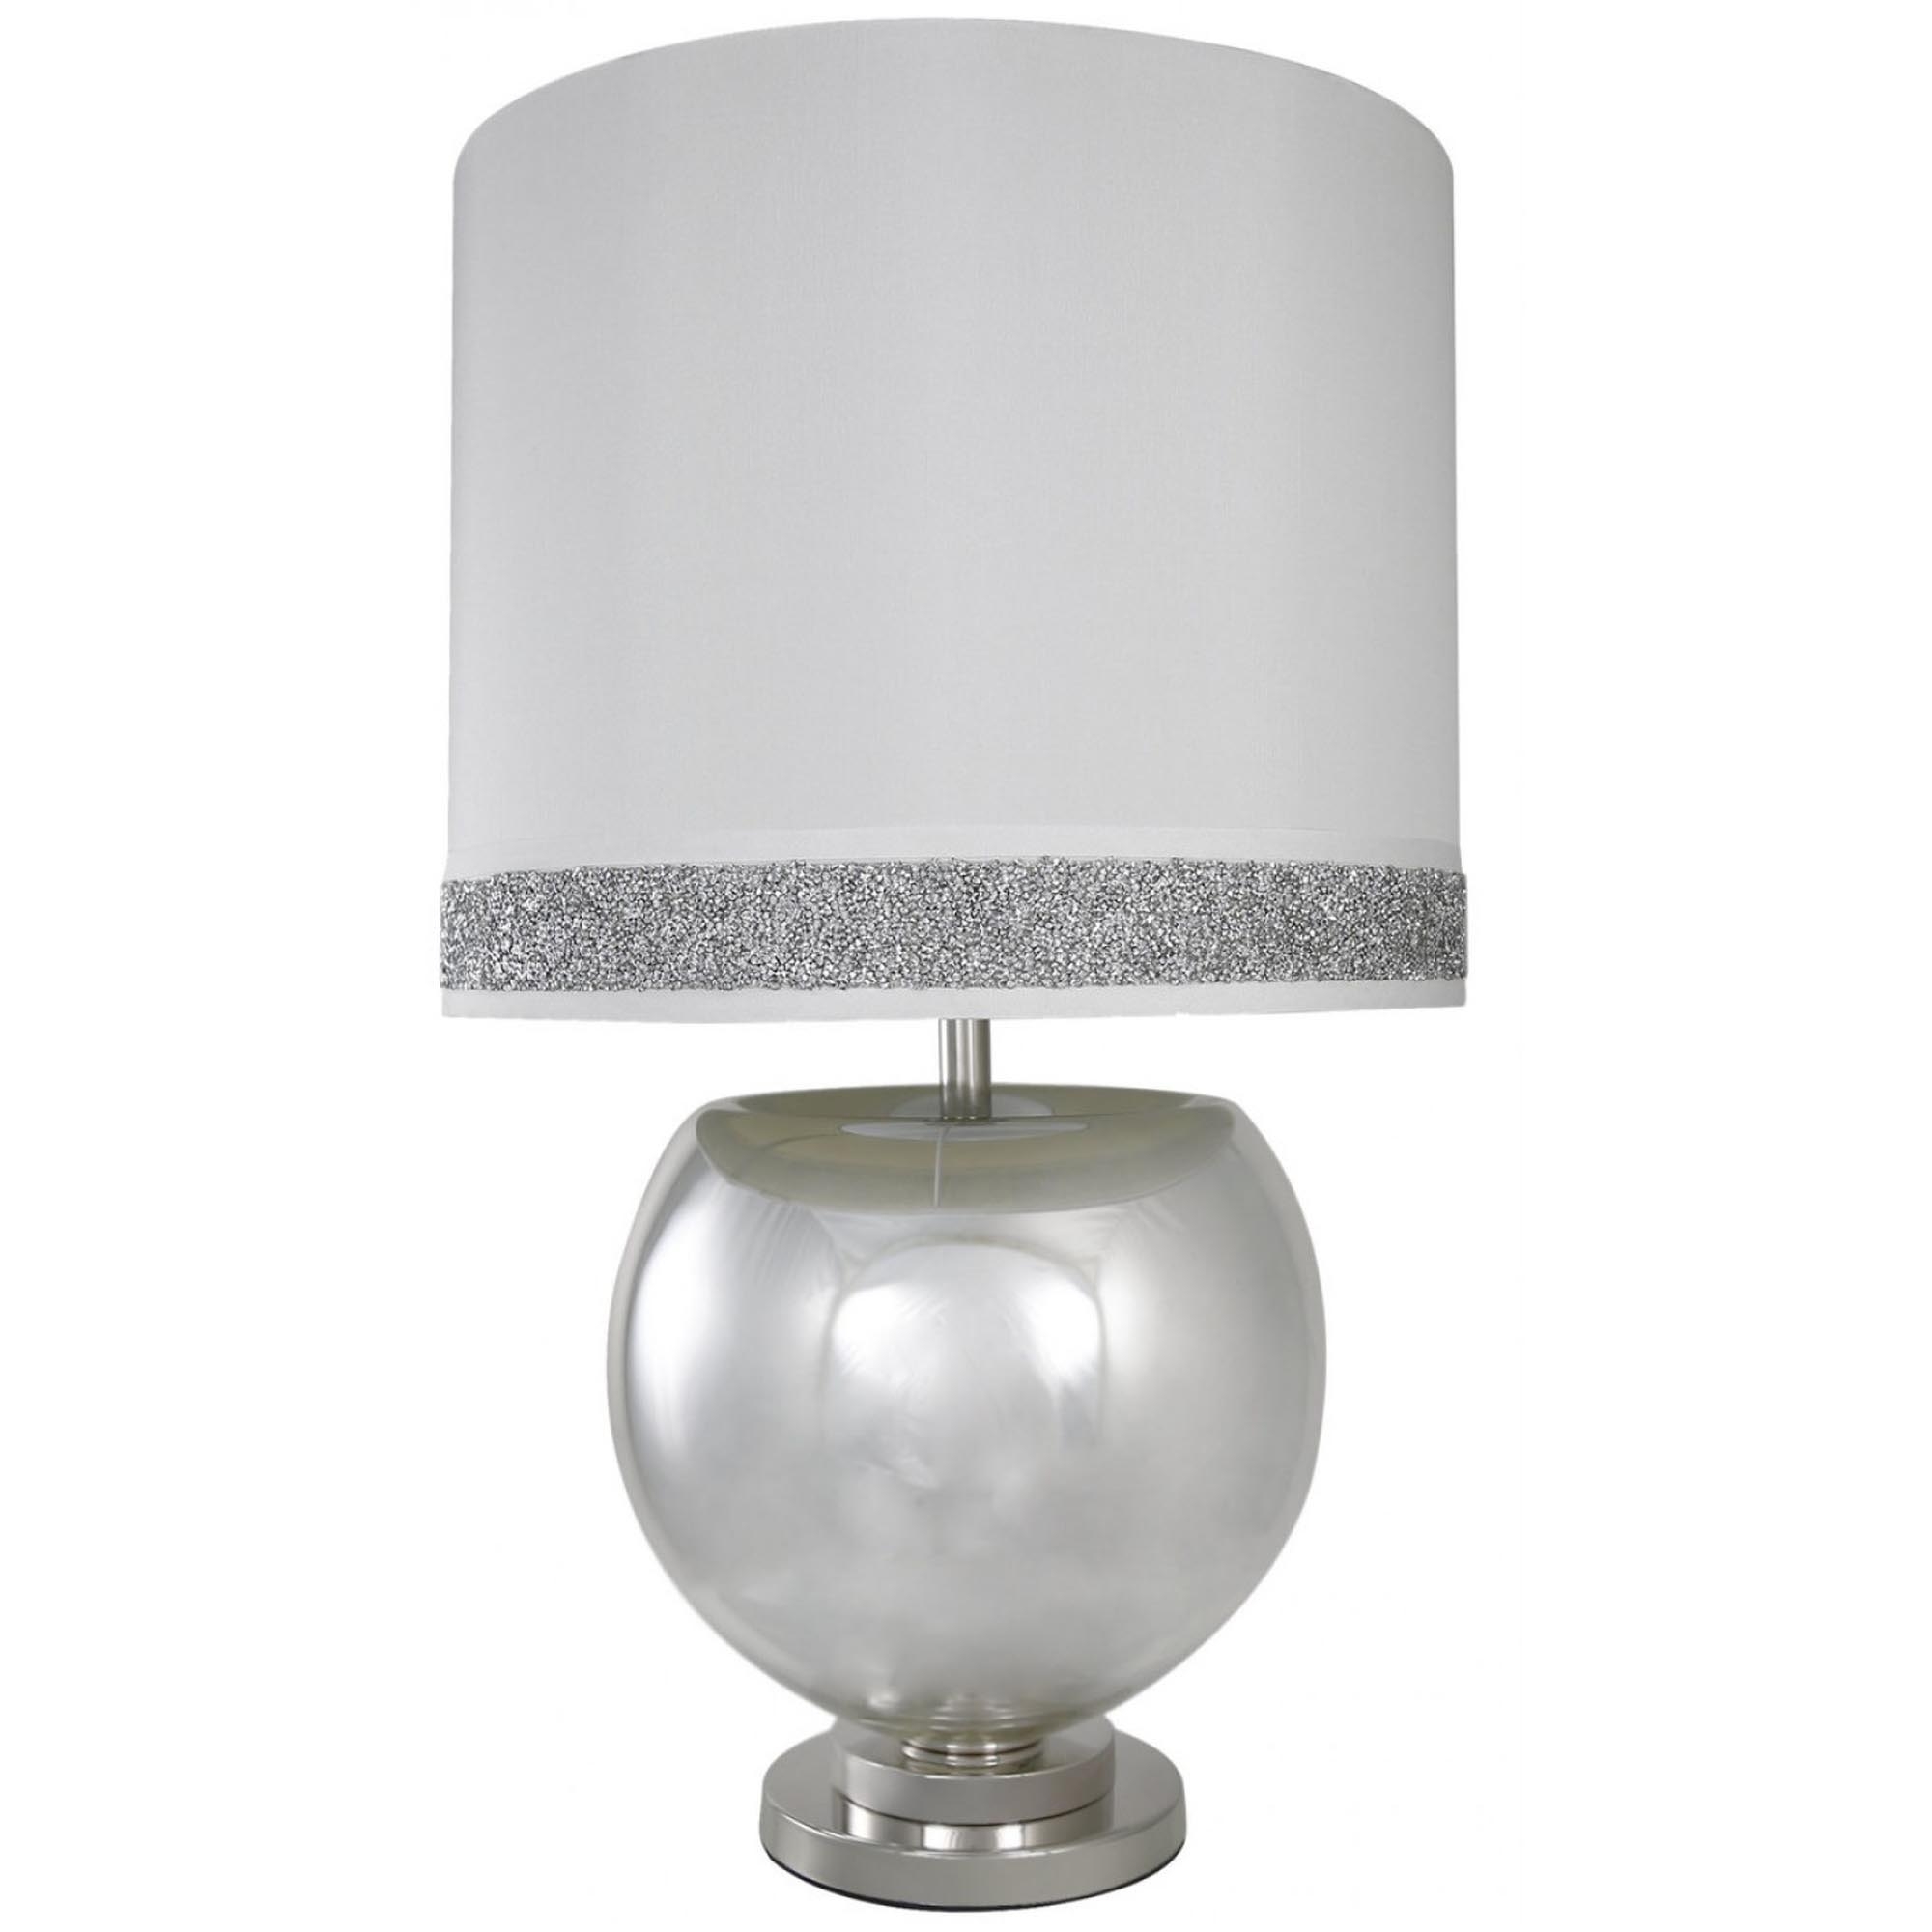 Silver Mercury Bowl Table Lamp | Table Lamp | HomesDirect365